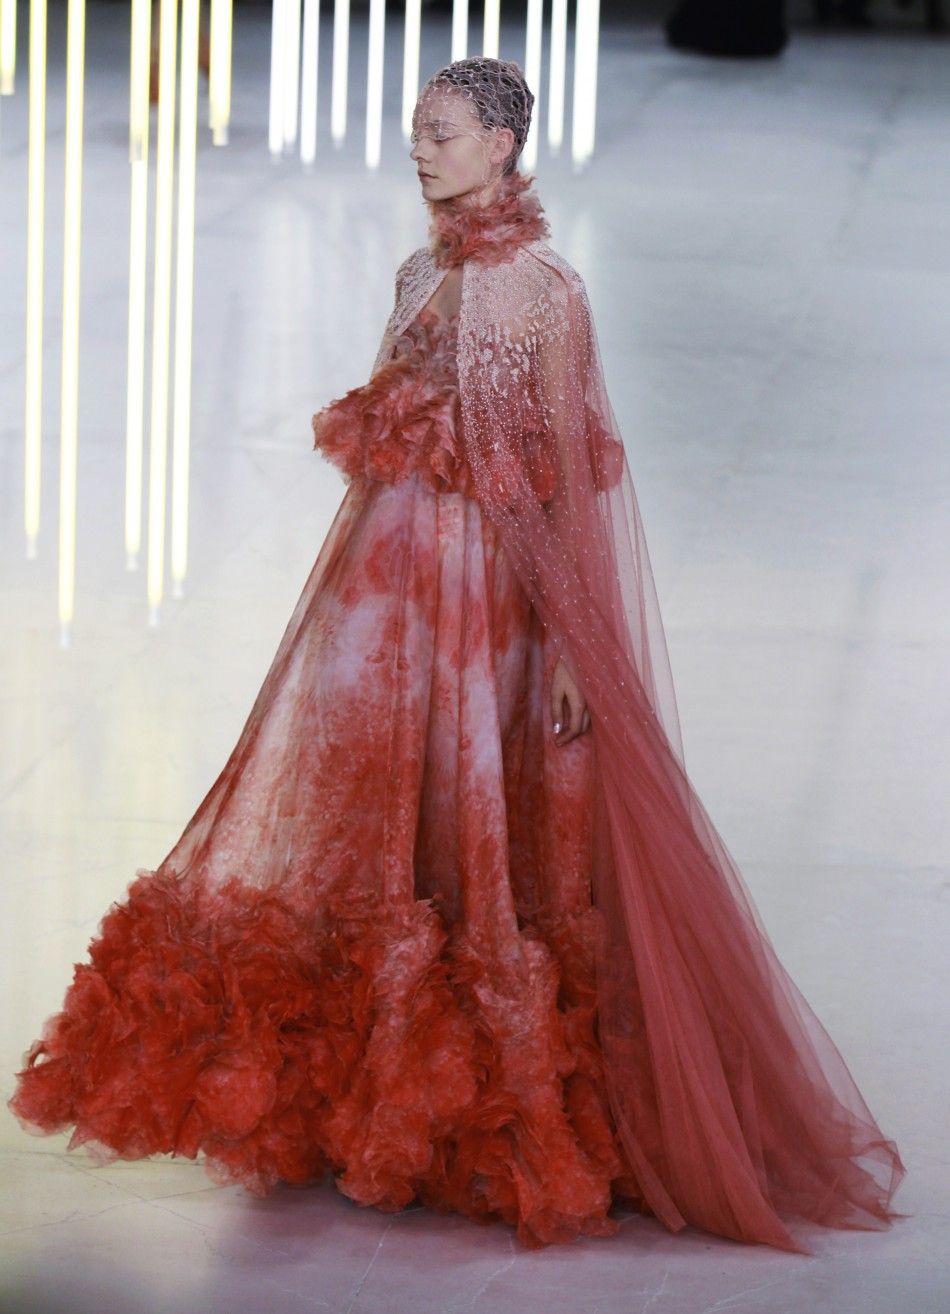 Paris Fashion Week Sarah Burtons Bold and Brilliant Creations for Alexander McQueen Leaves Awestruck PHOTOS